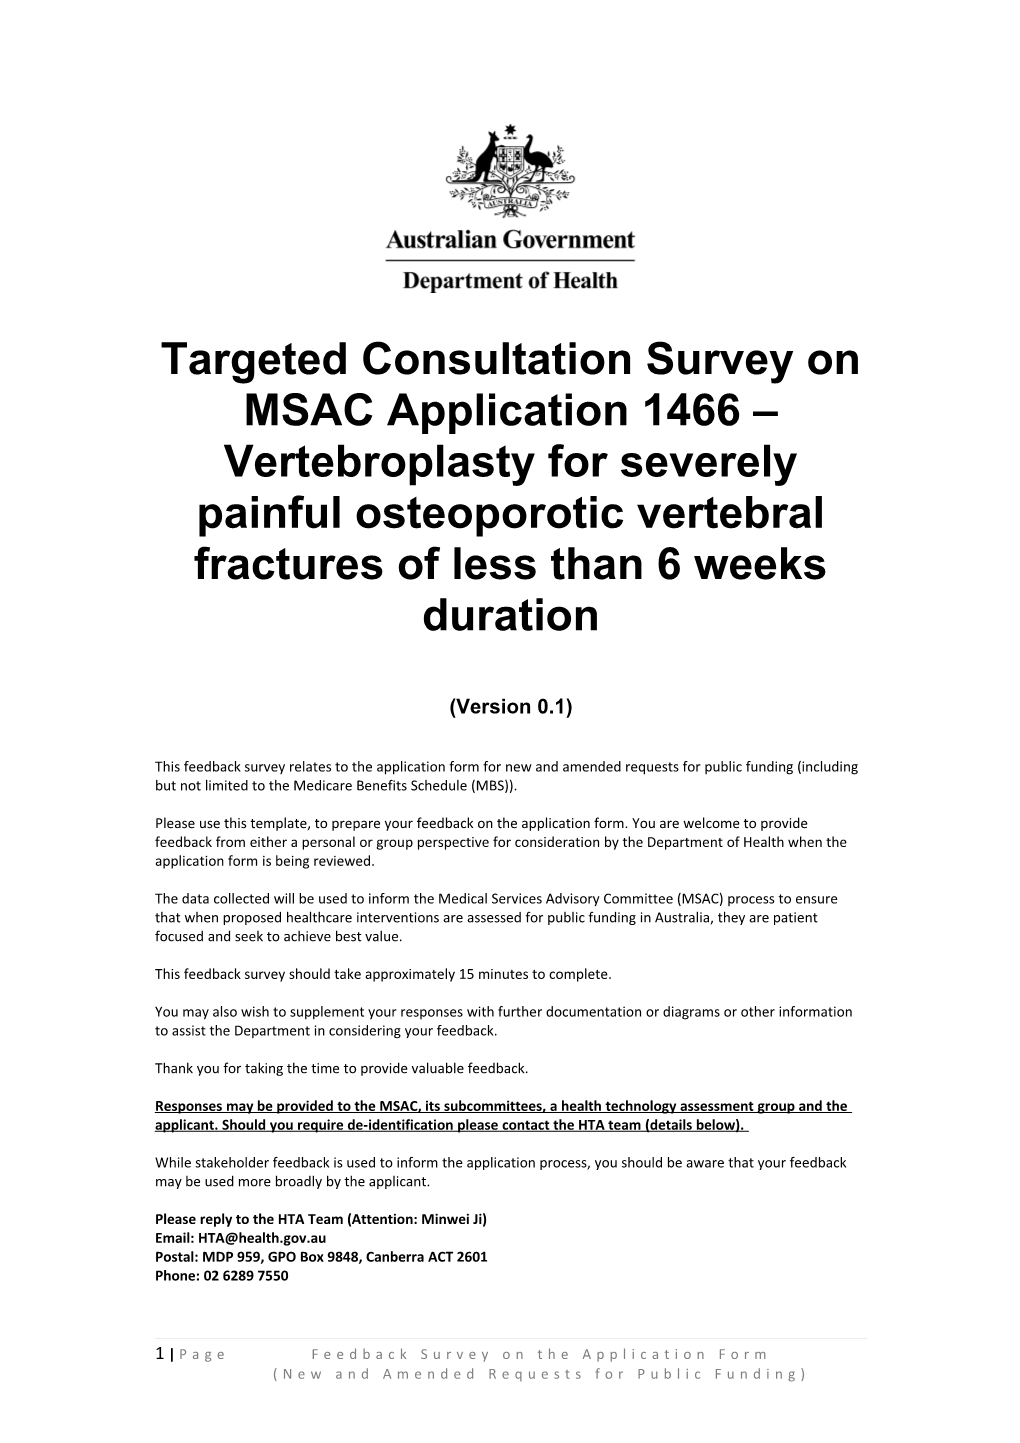 Targeted Consultation Survey on MSAC Application 1466 Vertebroplasty for Severely Painful